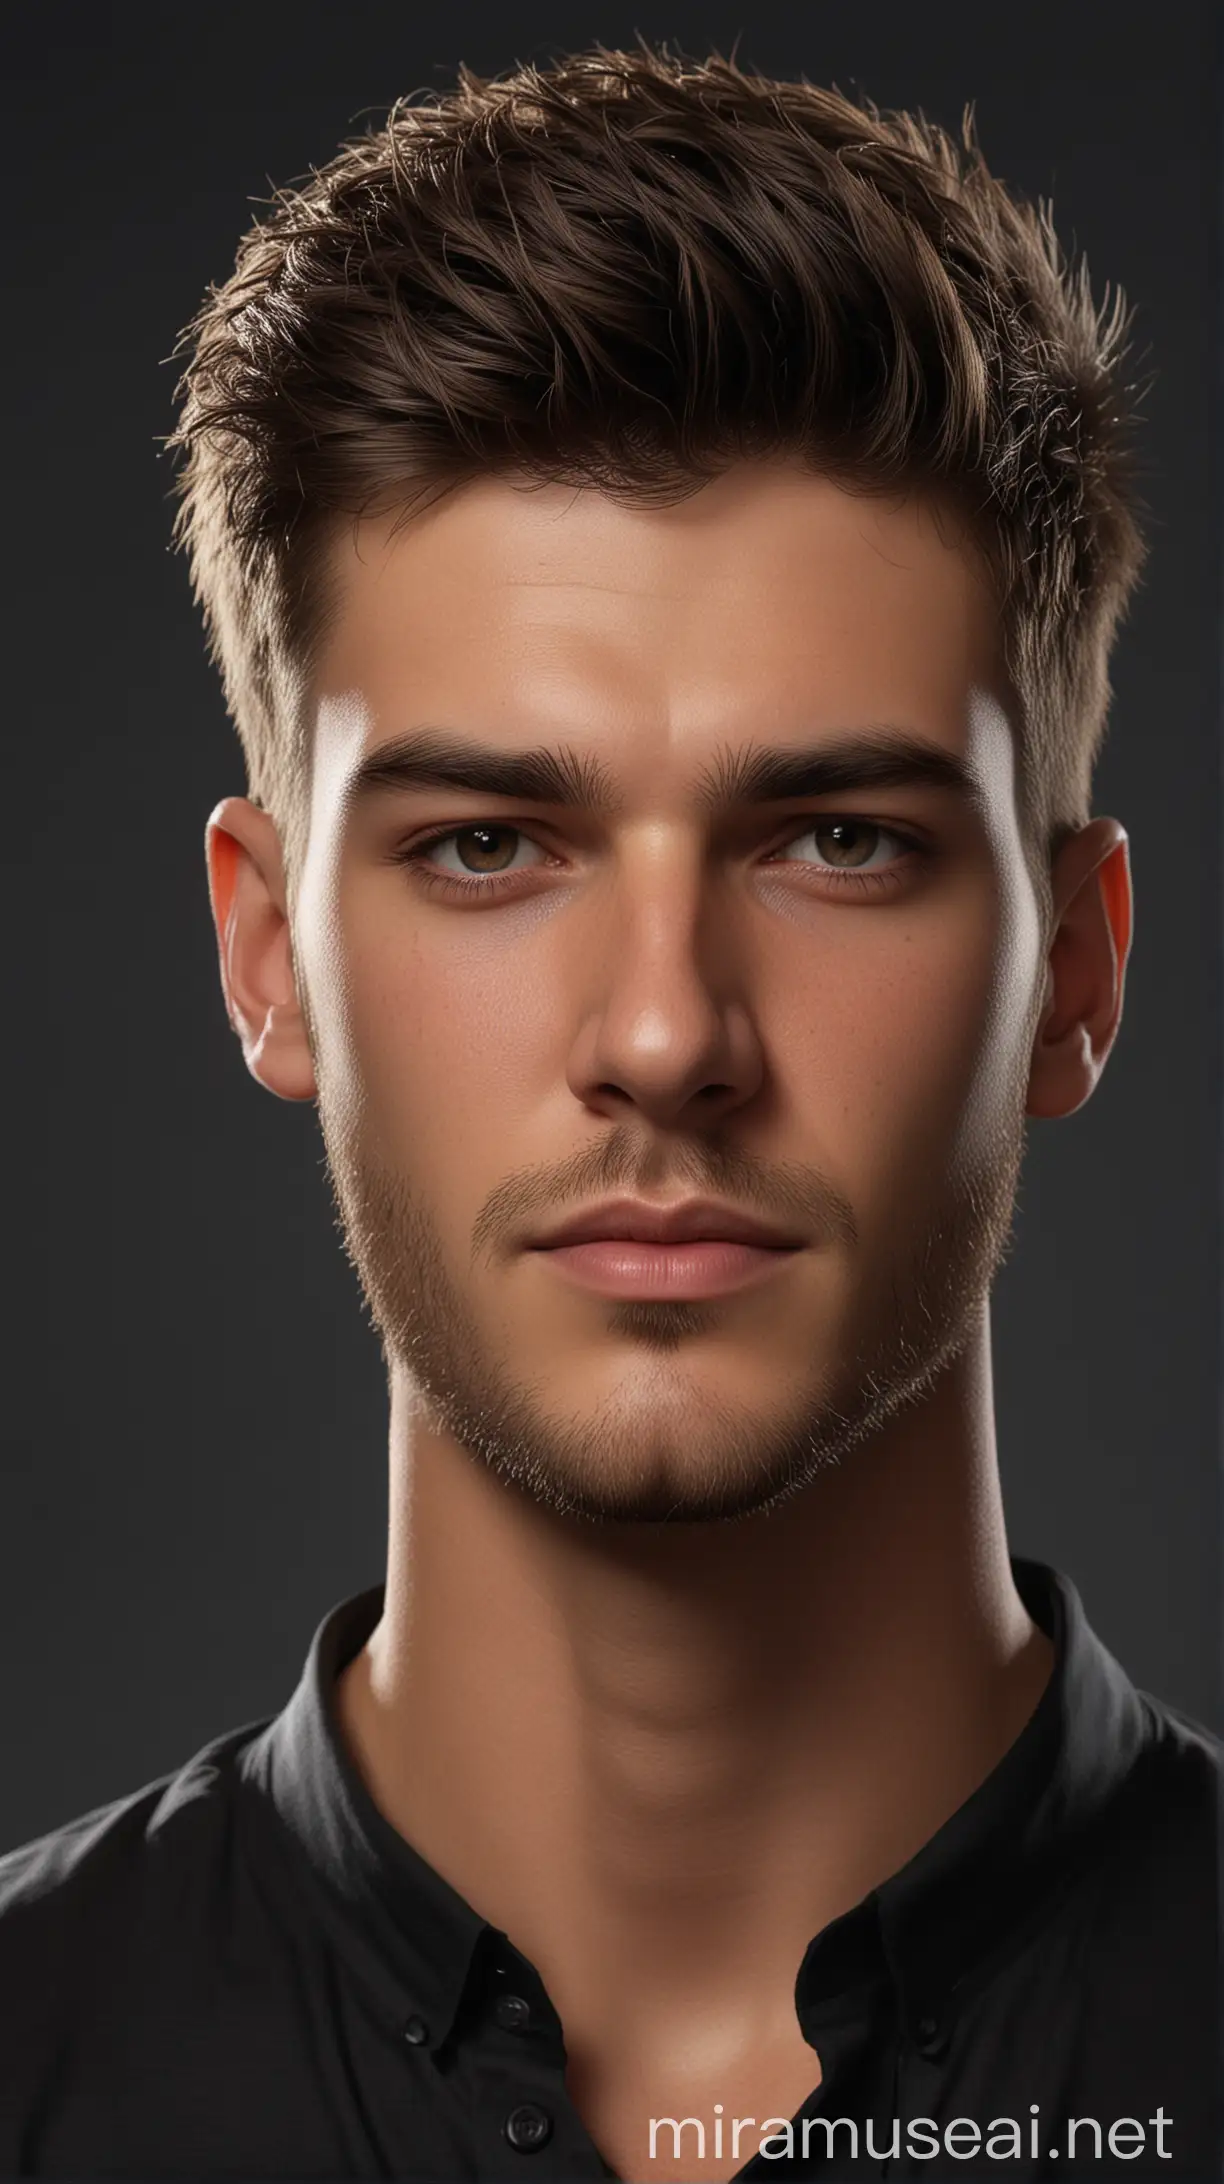 Young Man in Black Shirt with Taper Haircut in Photorealistic Portrait